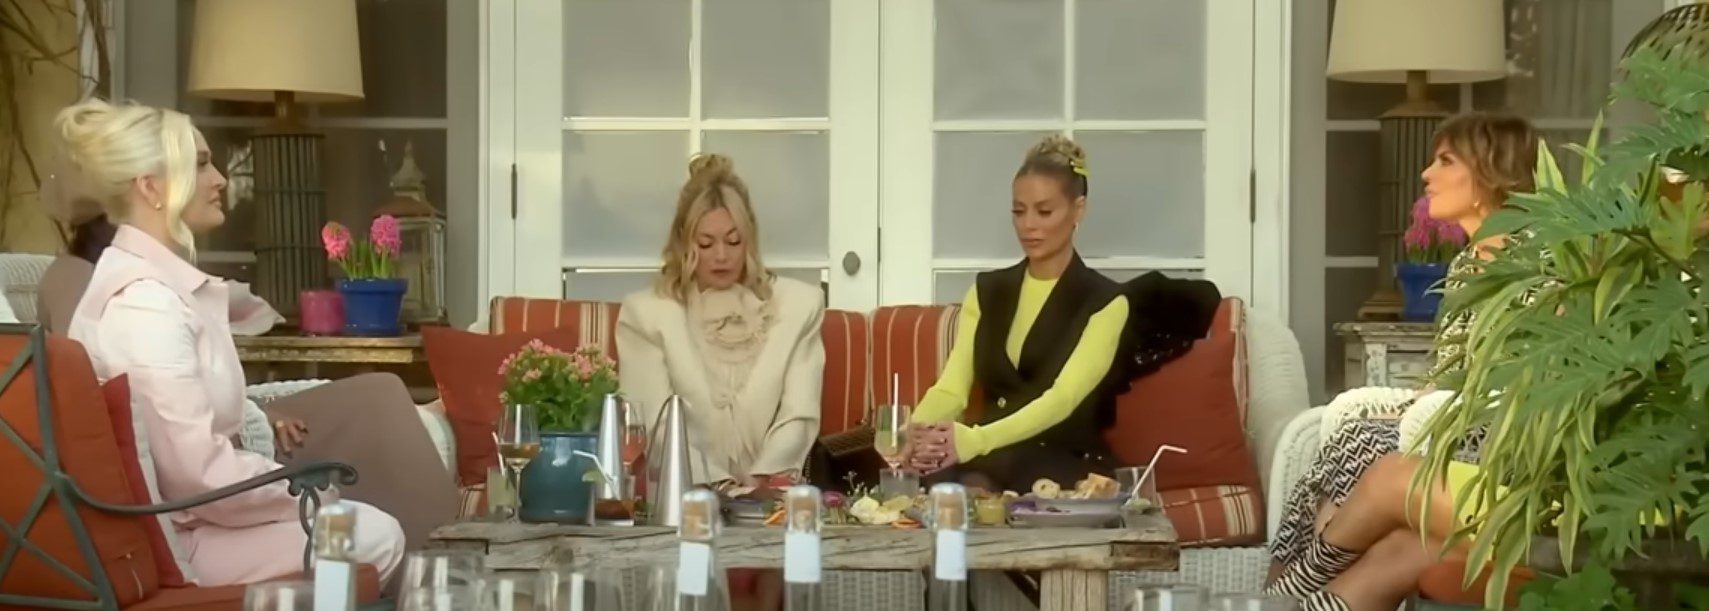 The Real Housewives of Beverly Hills season 12 Episode 14 Release Date